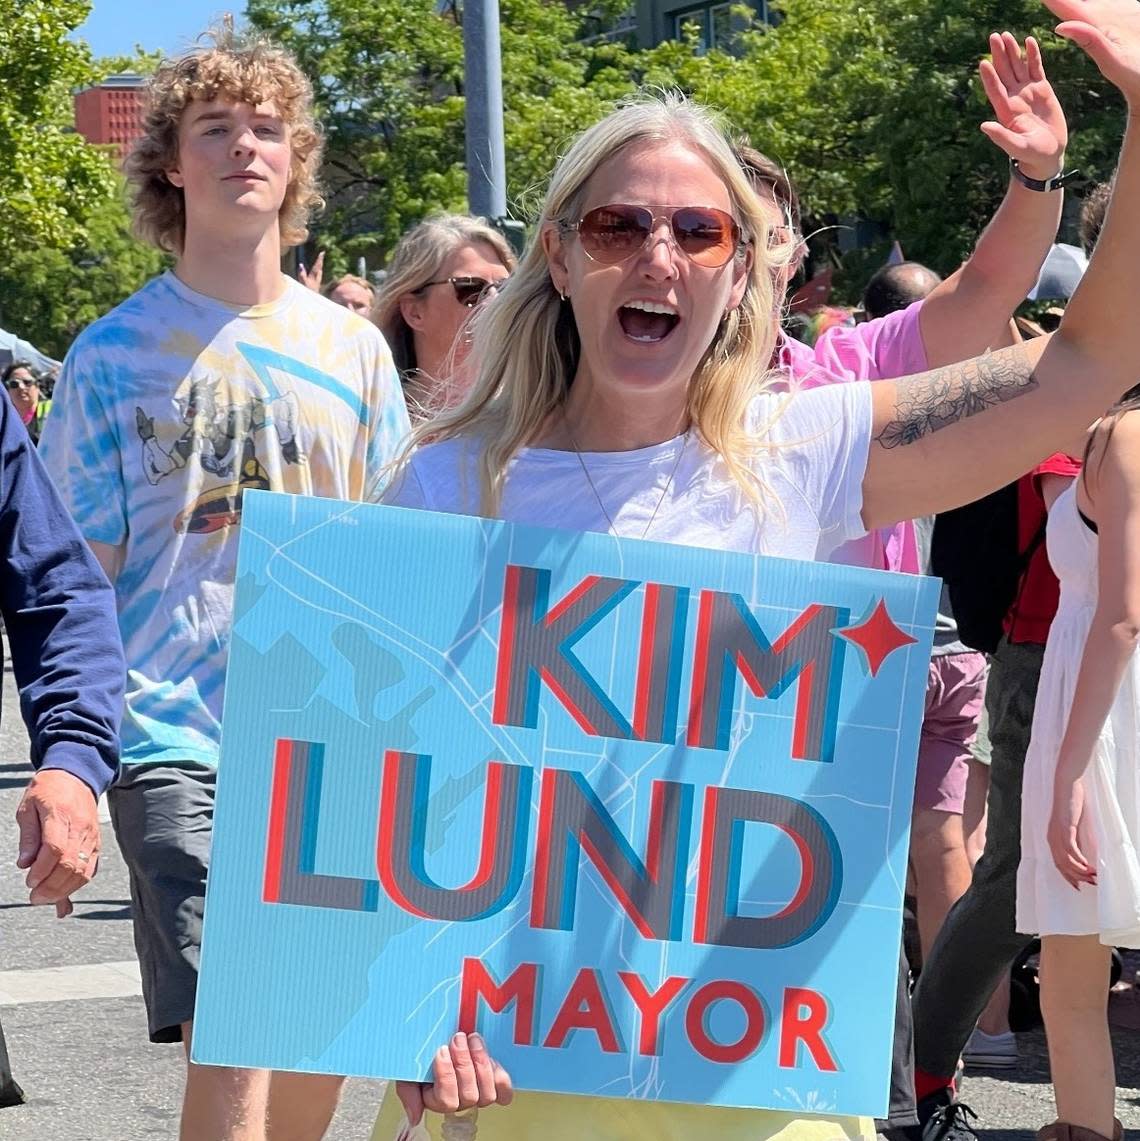 Kim Lund, a candidate for Bellingham mayor, marches with supporters at the Pride in Bellingham parade on July 9. Robert Mittendorf/The Bellingham Herald